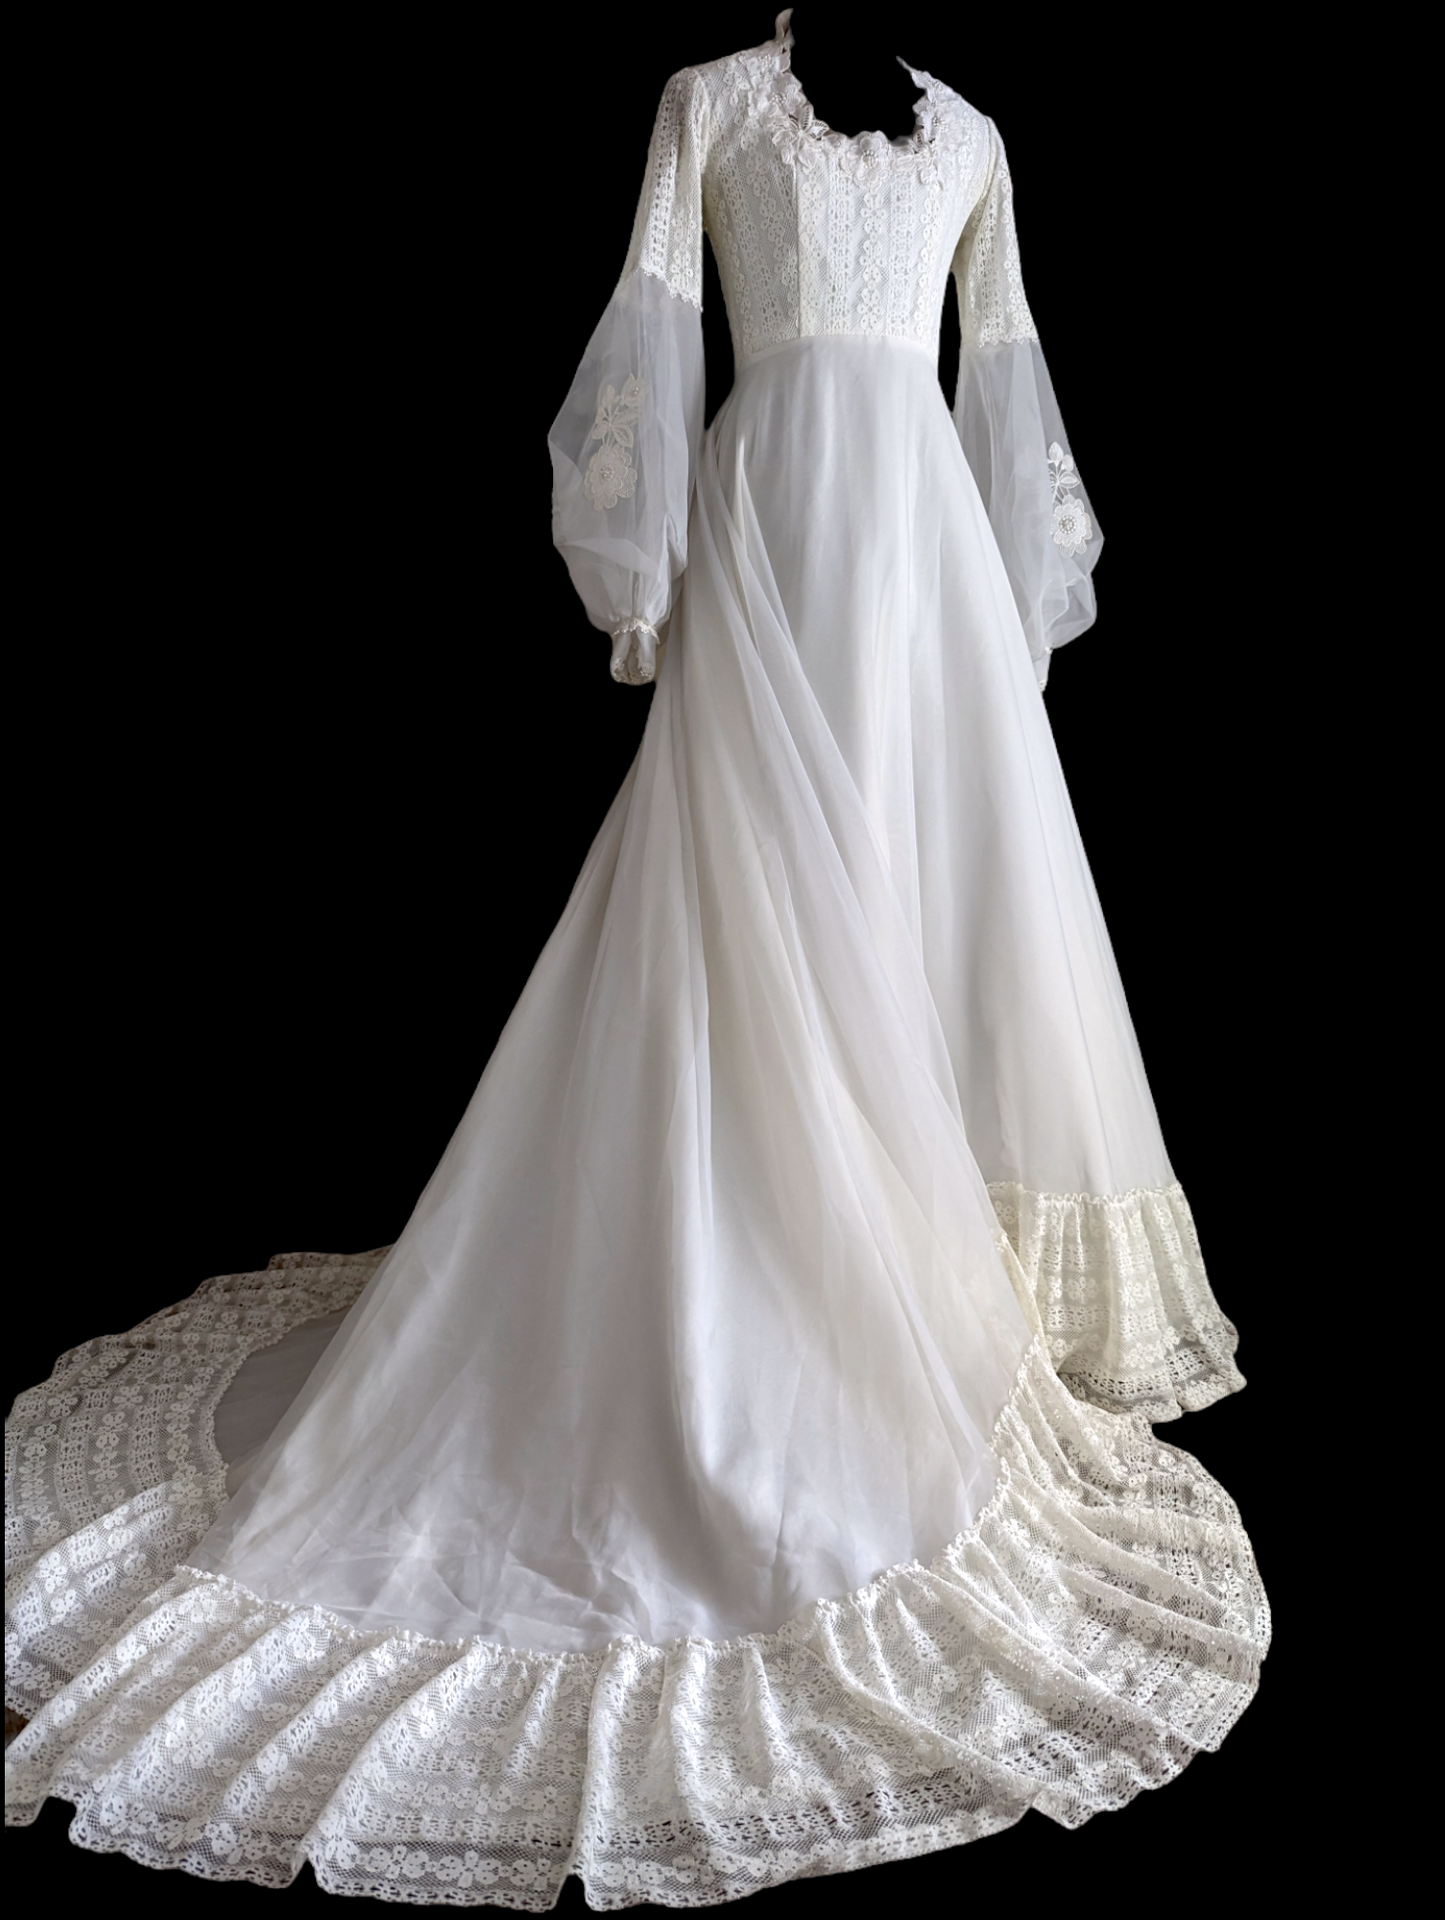 1960s Romantic Cottage Boho Style Wedding Dress with Bishop Sleeves, Queen Anne Neckline and Lace Accents in Bright White